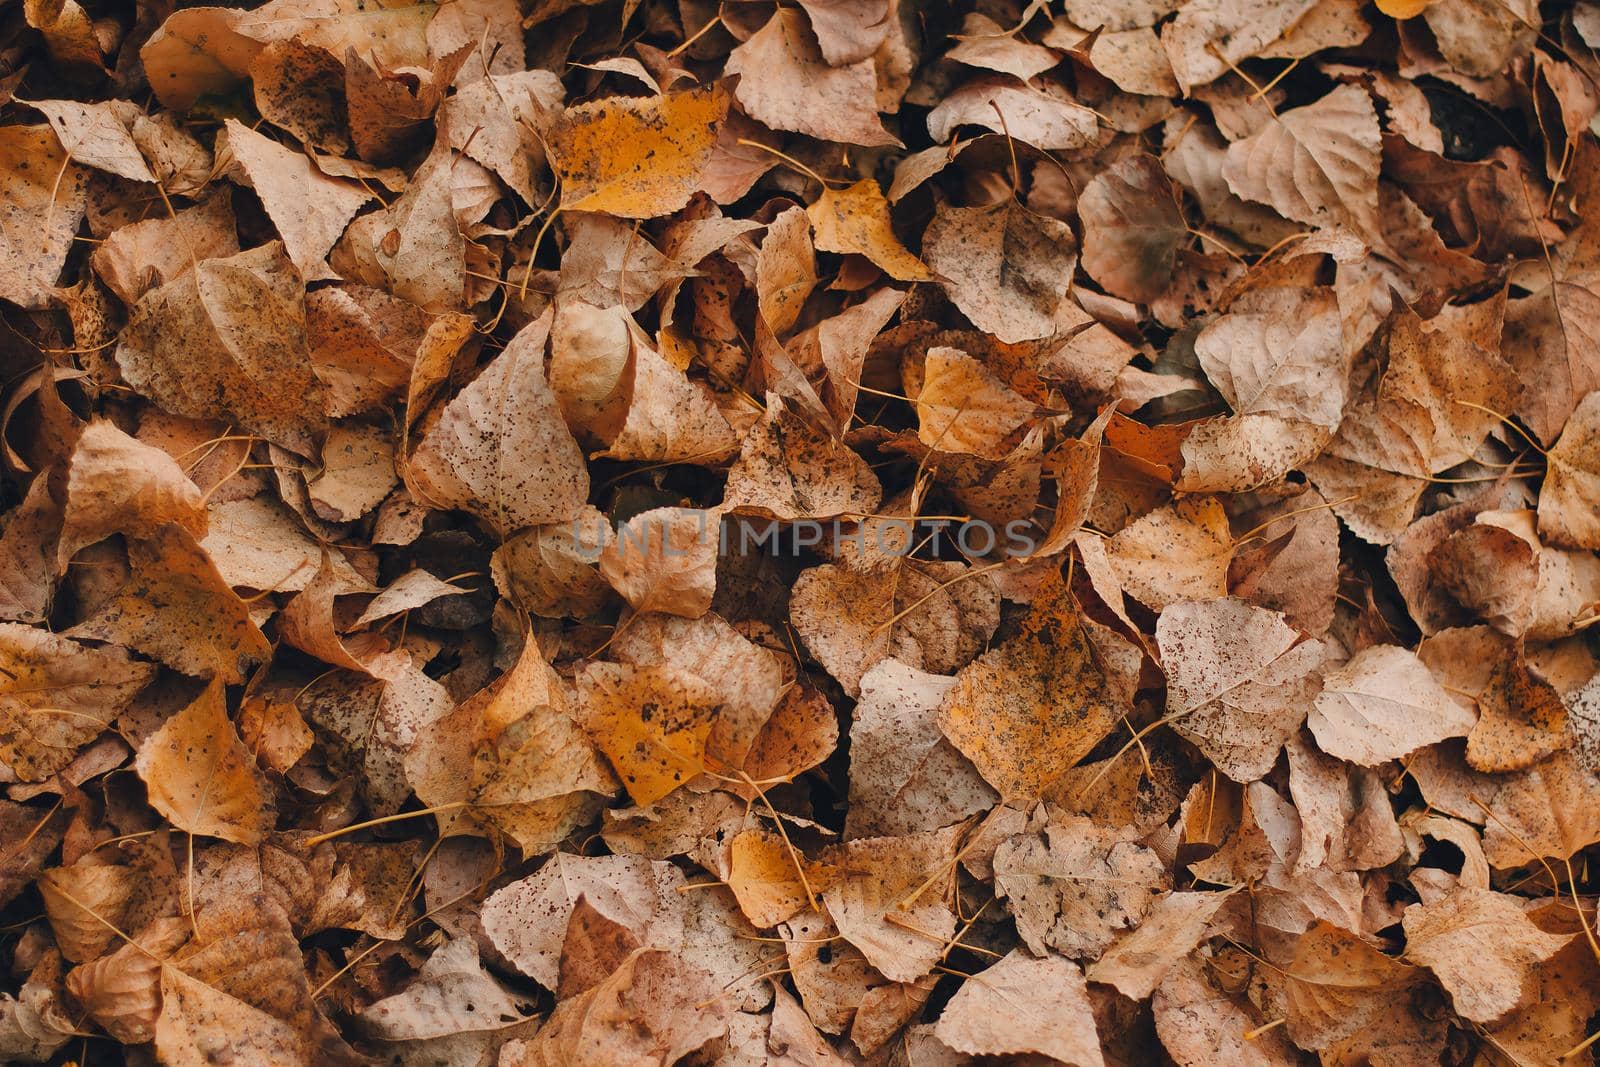 Colorful backround image of fallen autumn leaves perfect for seasonal use pattern.